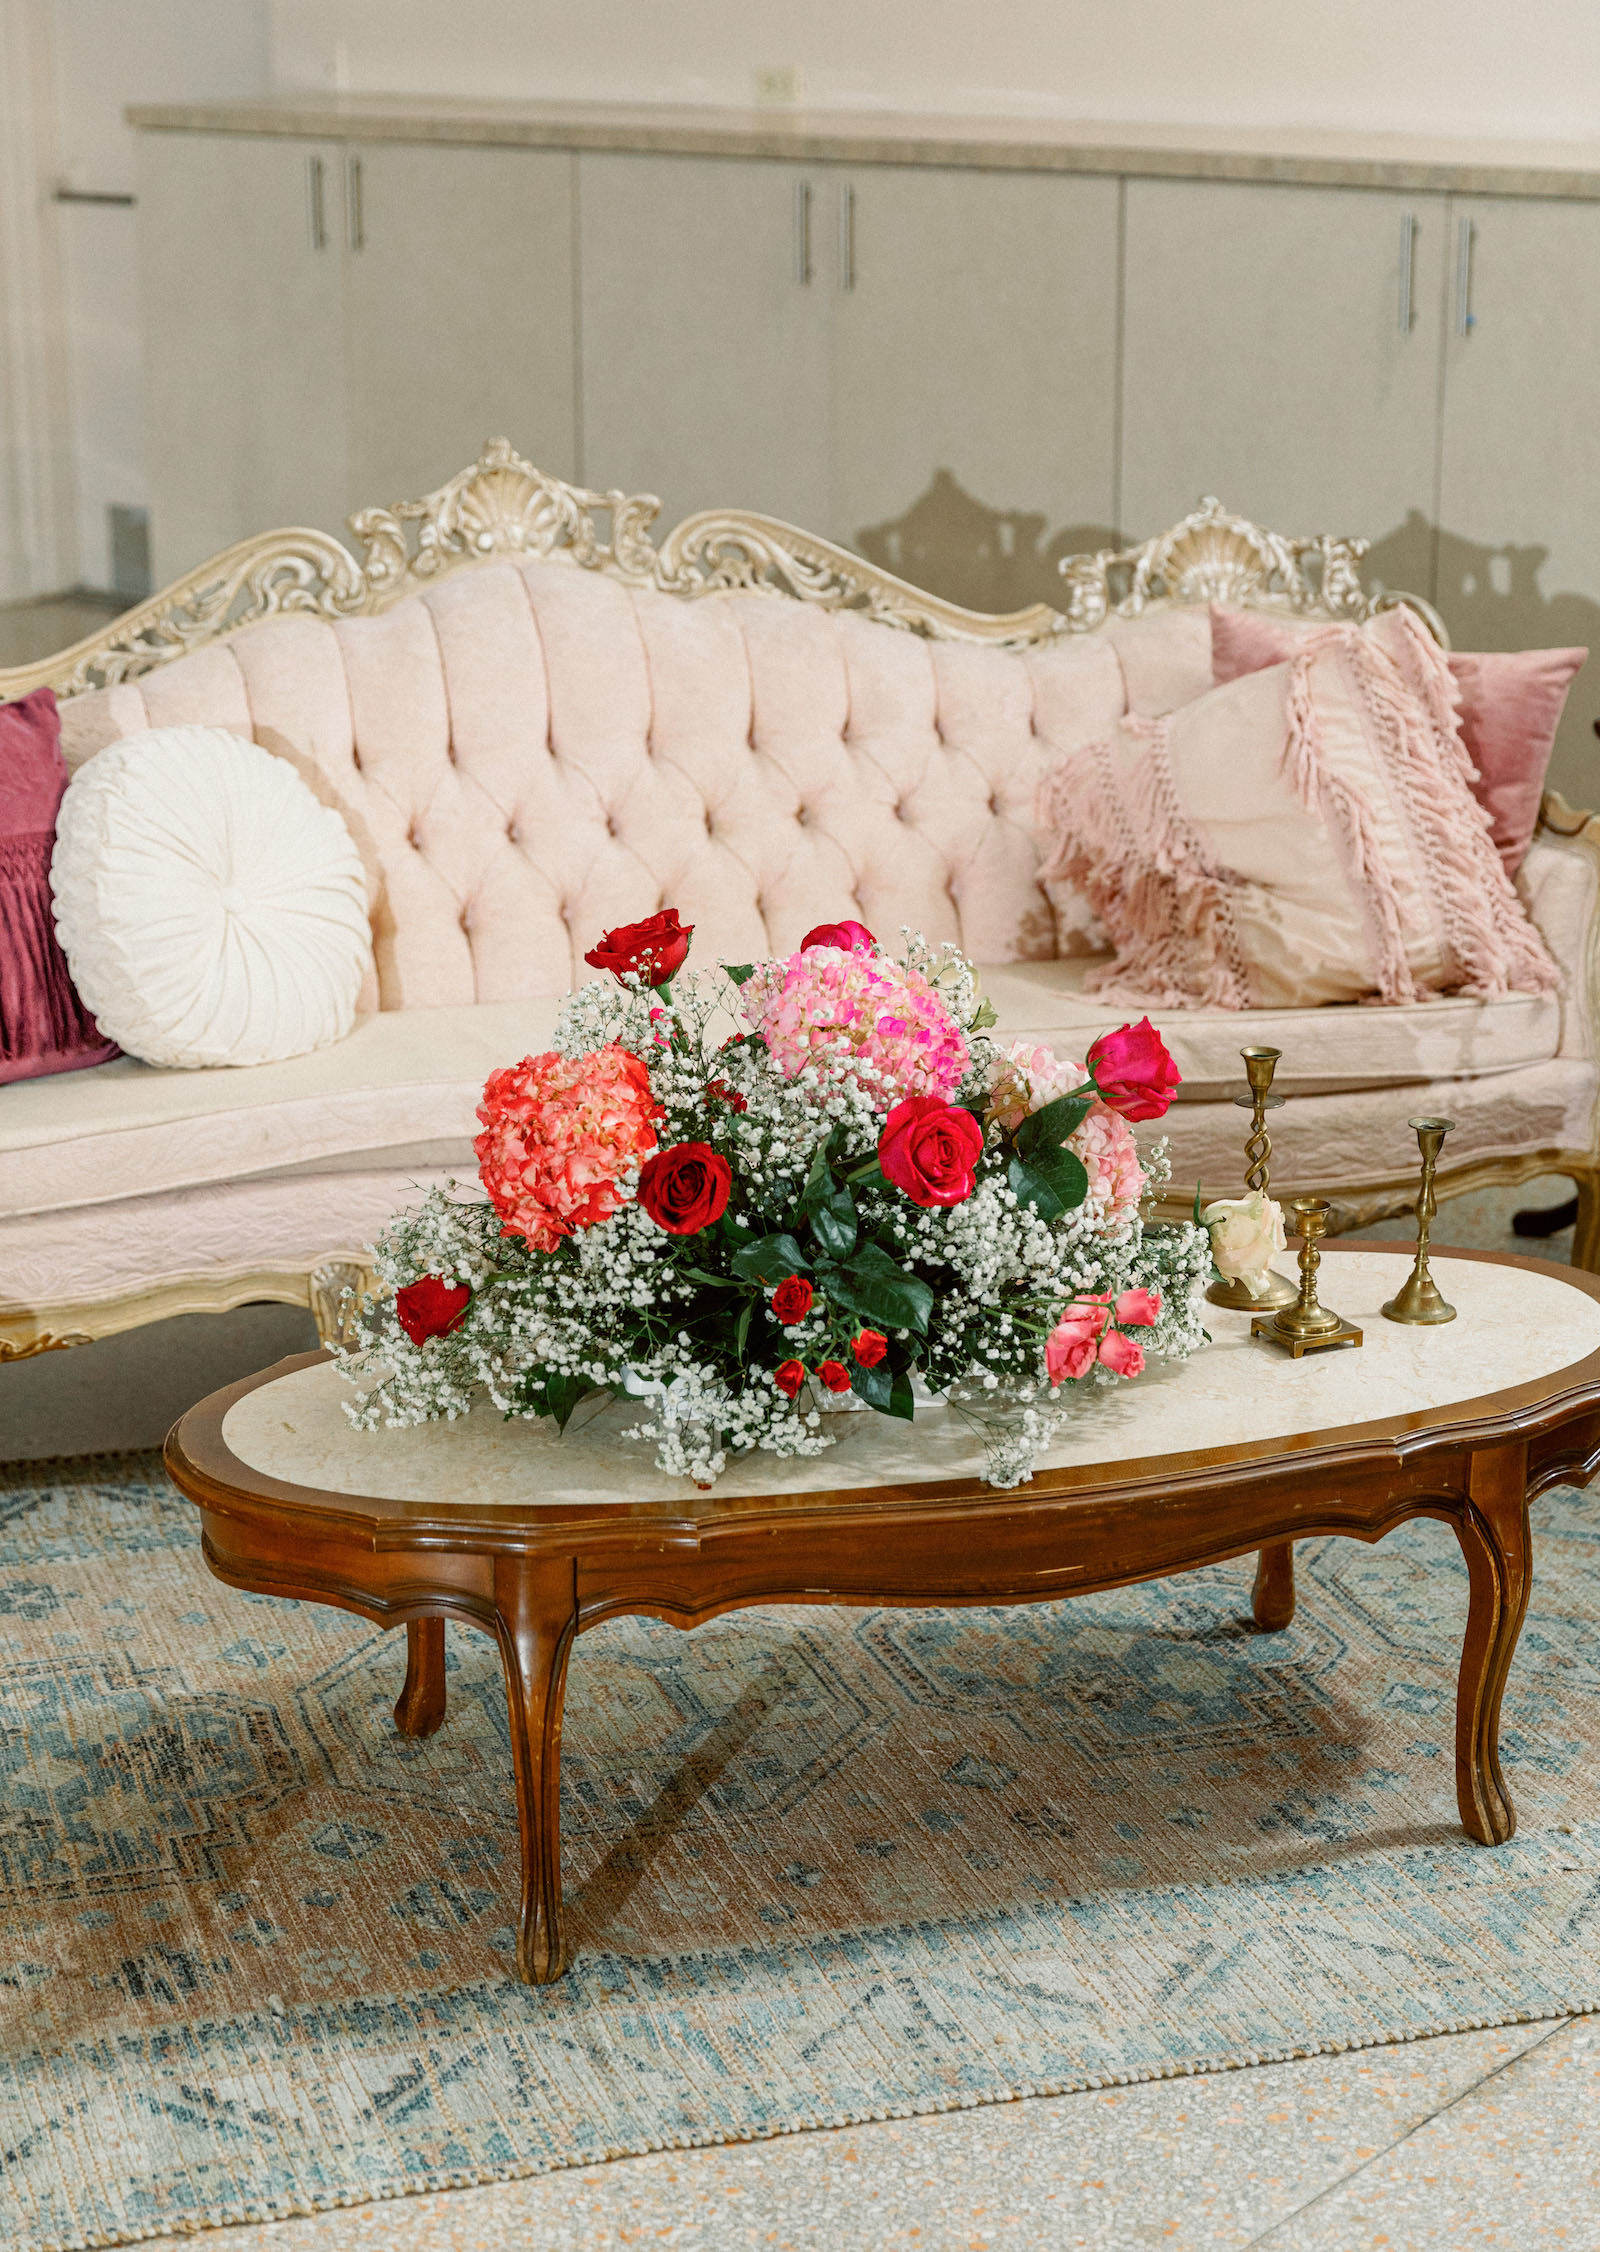 Fairytale Private Residence Wedding Reception Decor, Vintage Gold and Pink Tufted Couch, Antique Coffee Table with Lush Babys Breathe, Red Roses and Pink Hydrangeas Floral Centerpiece | Tampa Bay Wedding Photographer Dewitt for Love Photography | Wedding Florist Lemon Drops